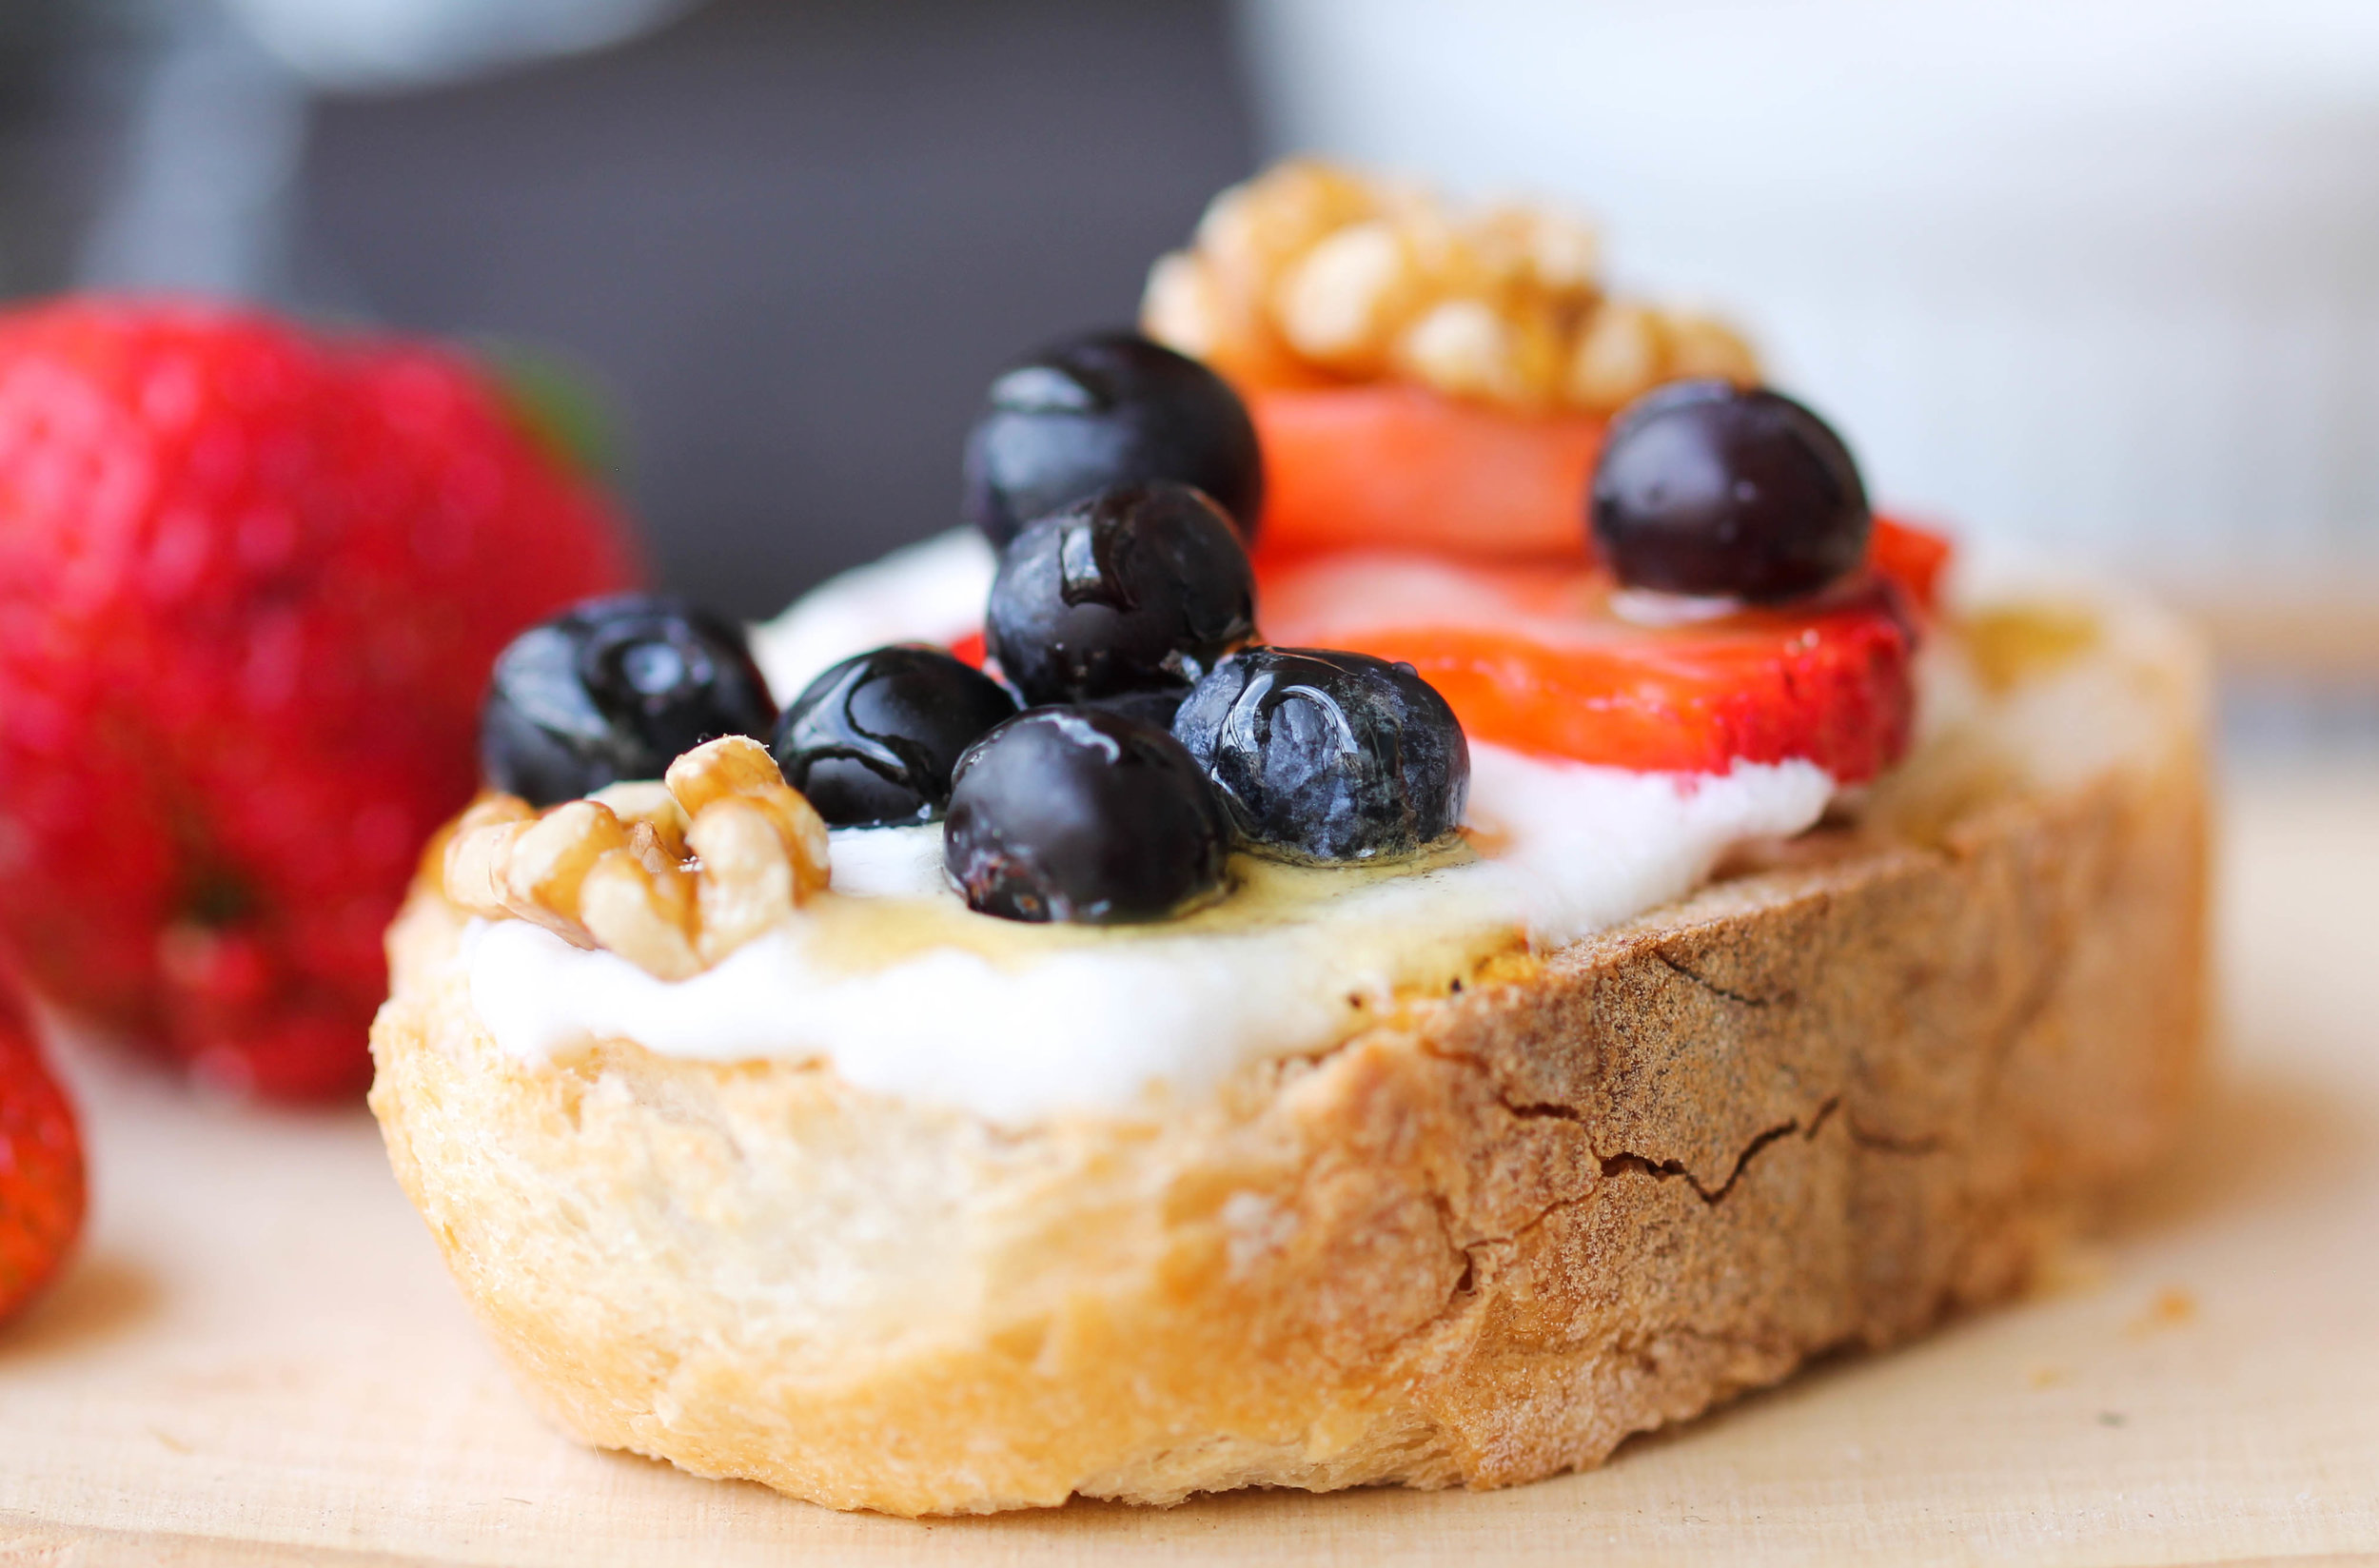 Whipped Cottage Cheese with Berries Crostini is an easy, quick appetizer or dessert that takes 5 minutes or less to make.